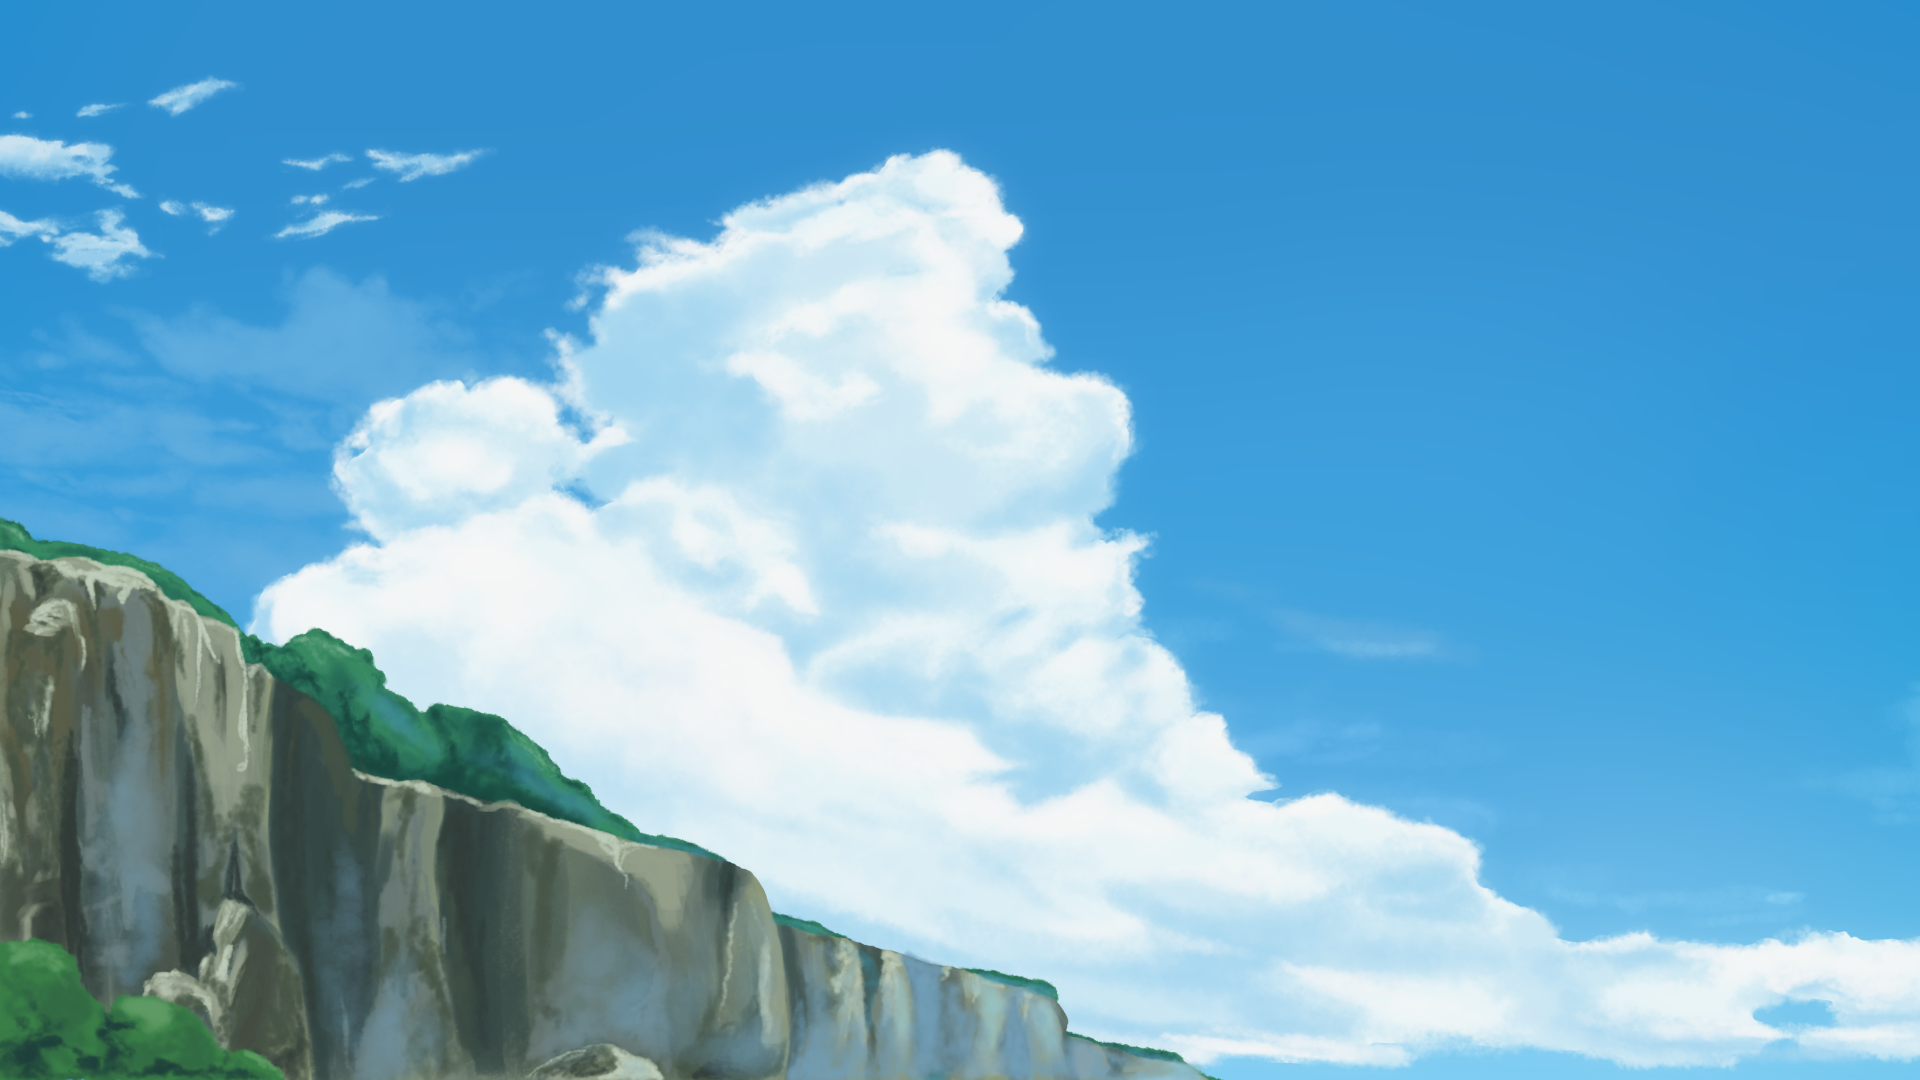 Clouds And Cliff